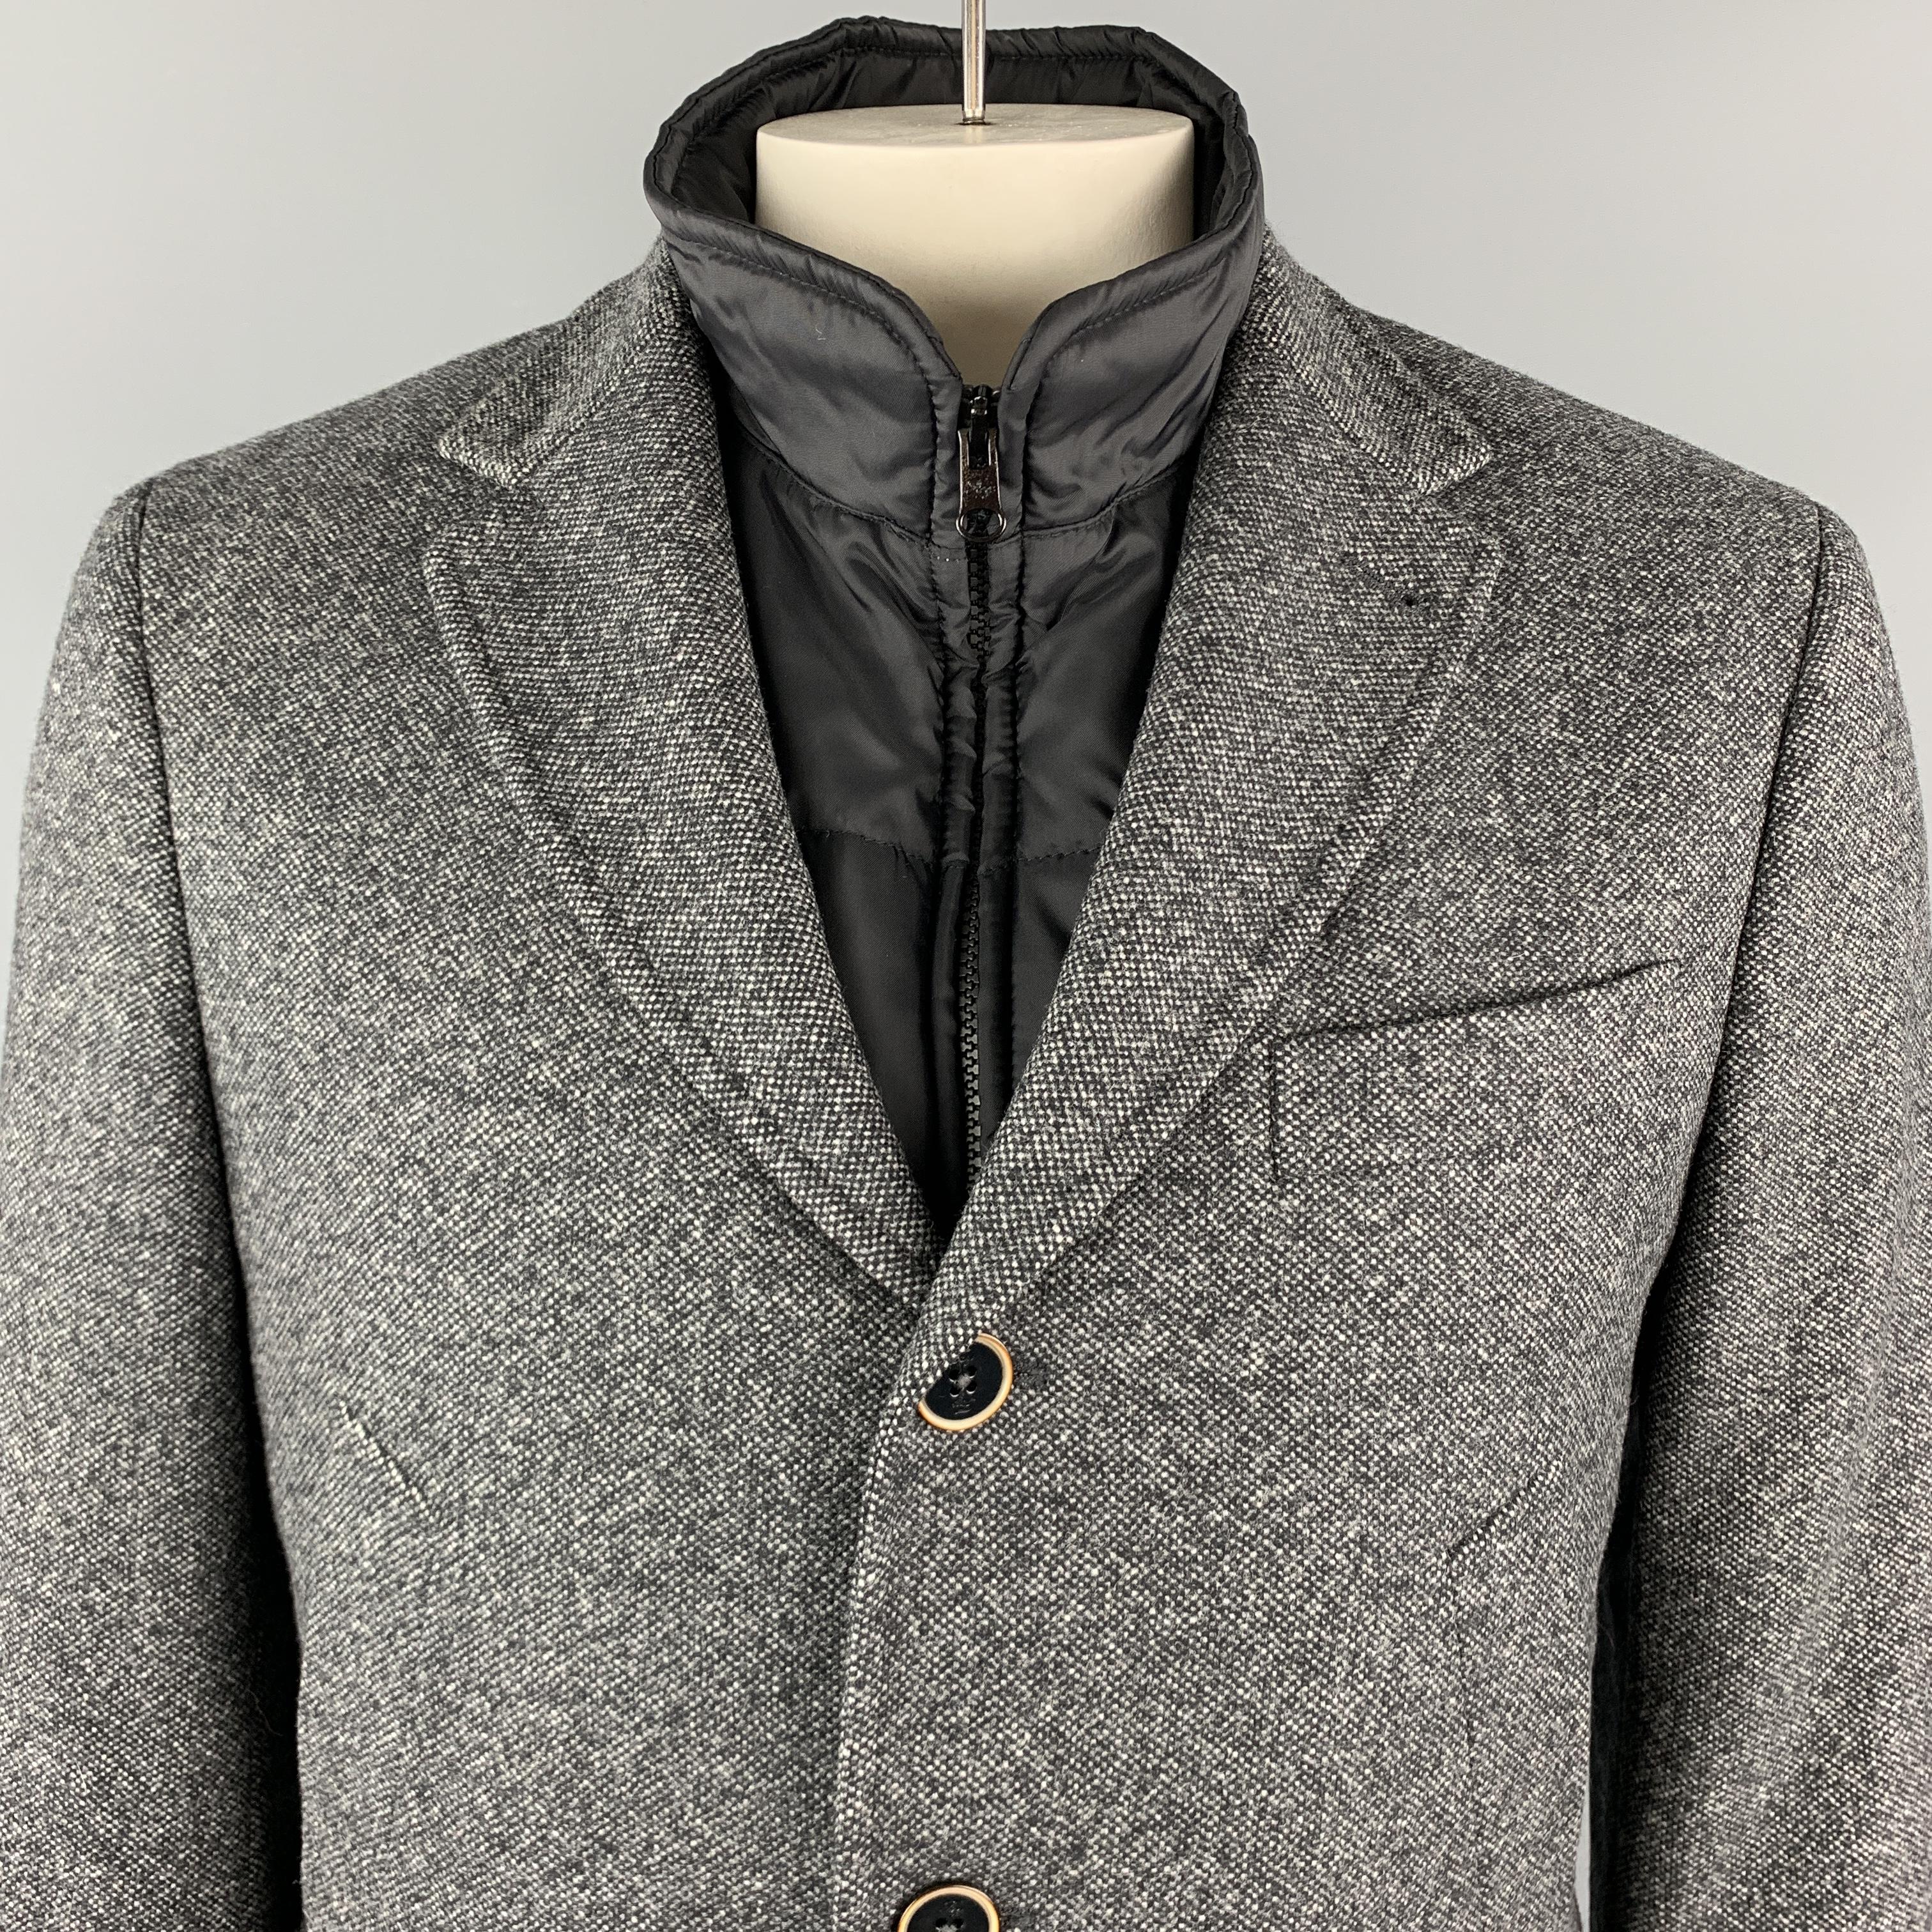 FAY Jacket comes in a grey heather polyammide material, with a notch lapel, patch pockets, three buttons at closure, single breasted, buttoned cuffs, a single vent at back, elbow patches, and a detachable line vest.  Made in Italy.

Excelent